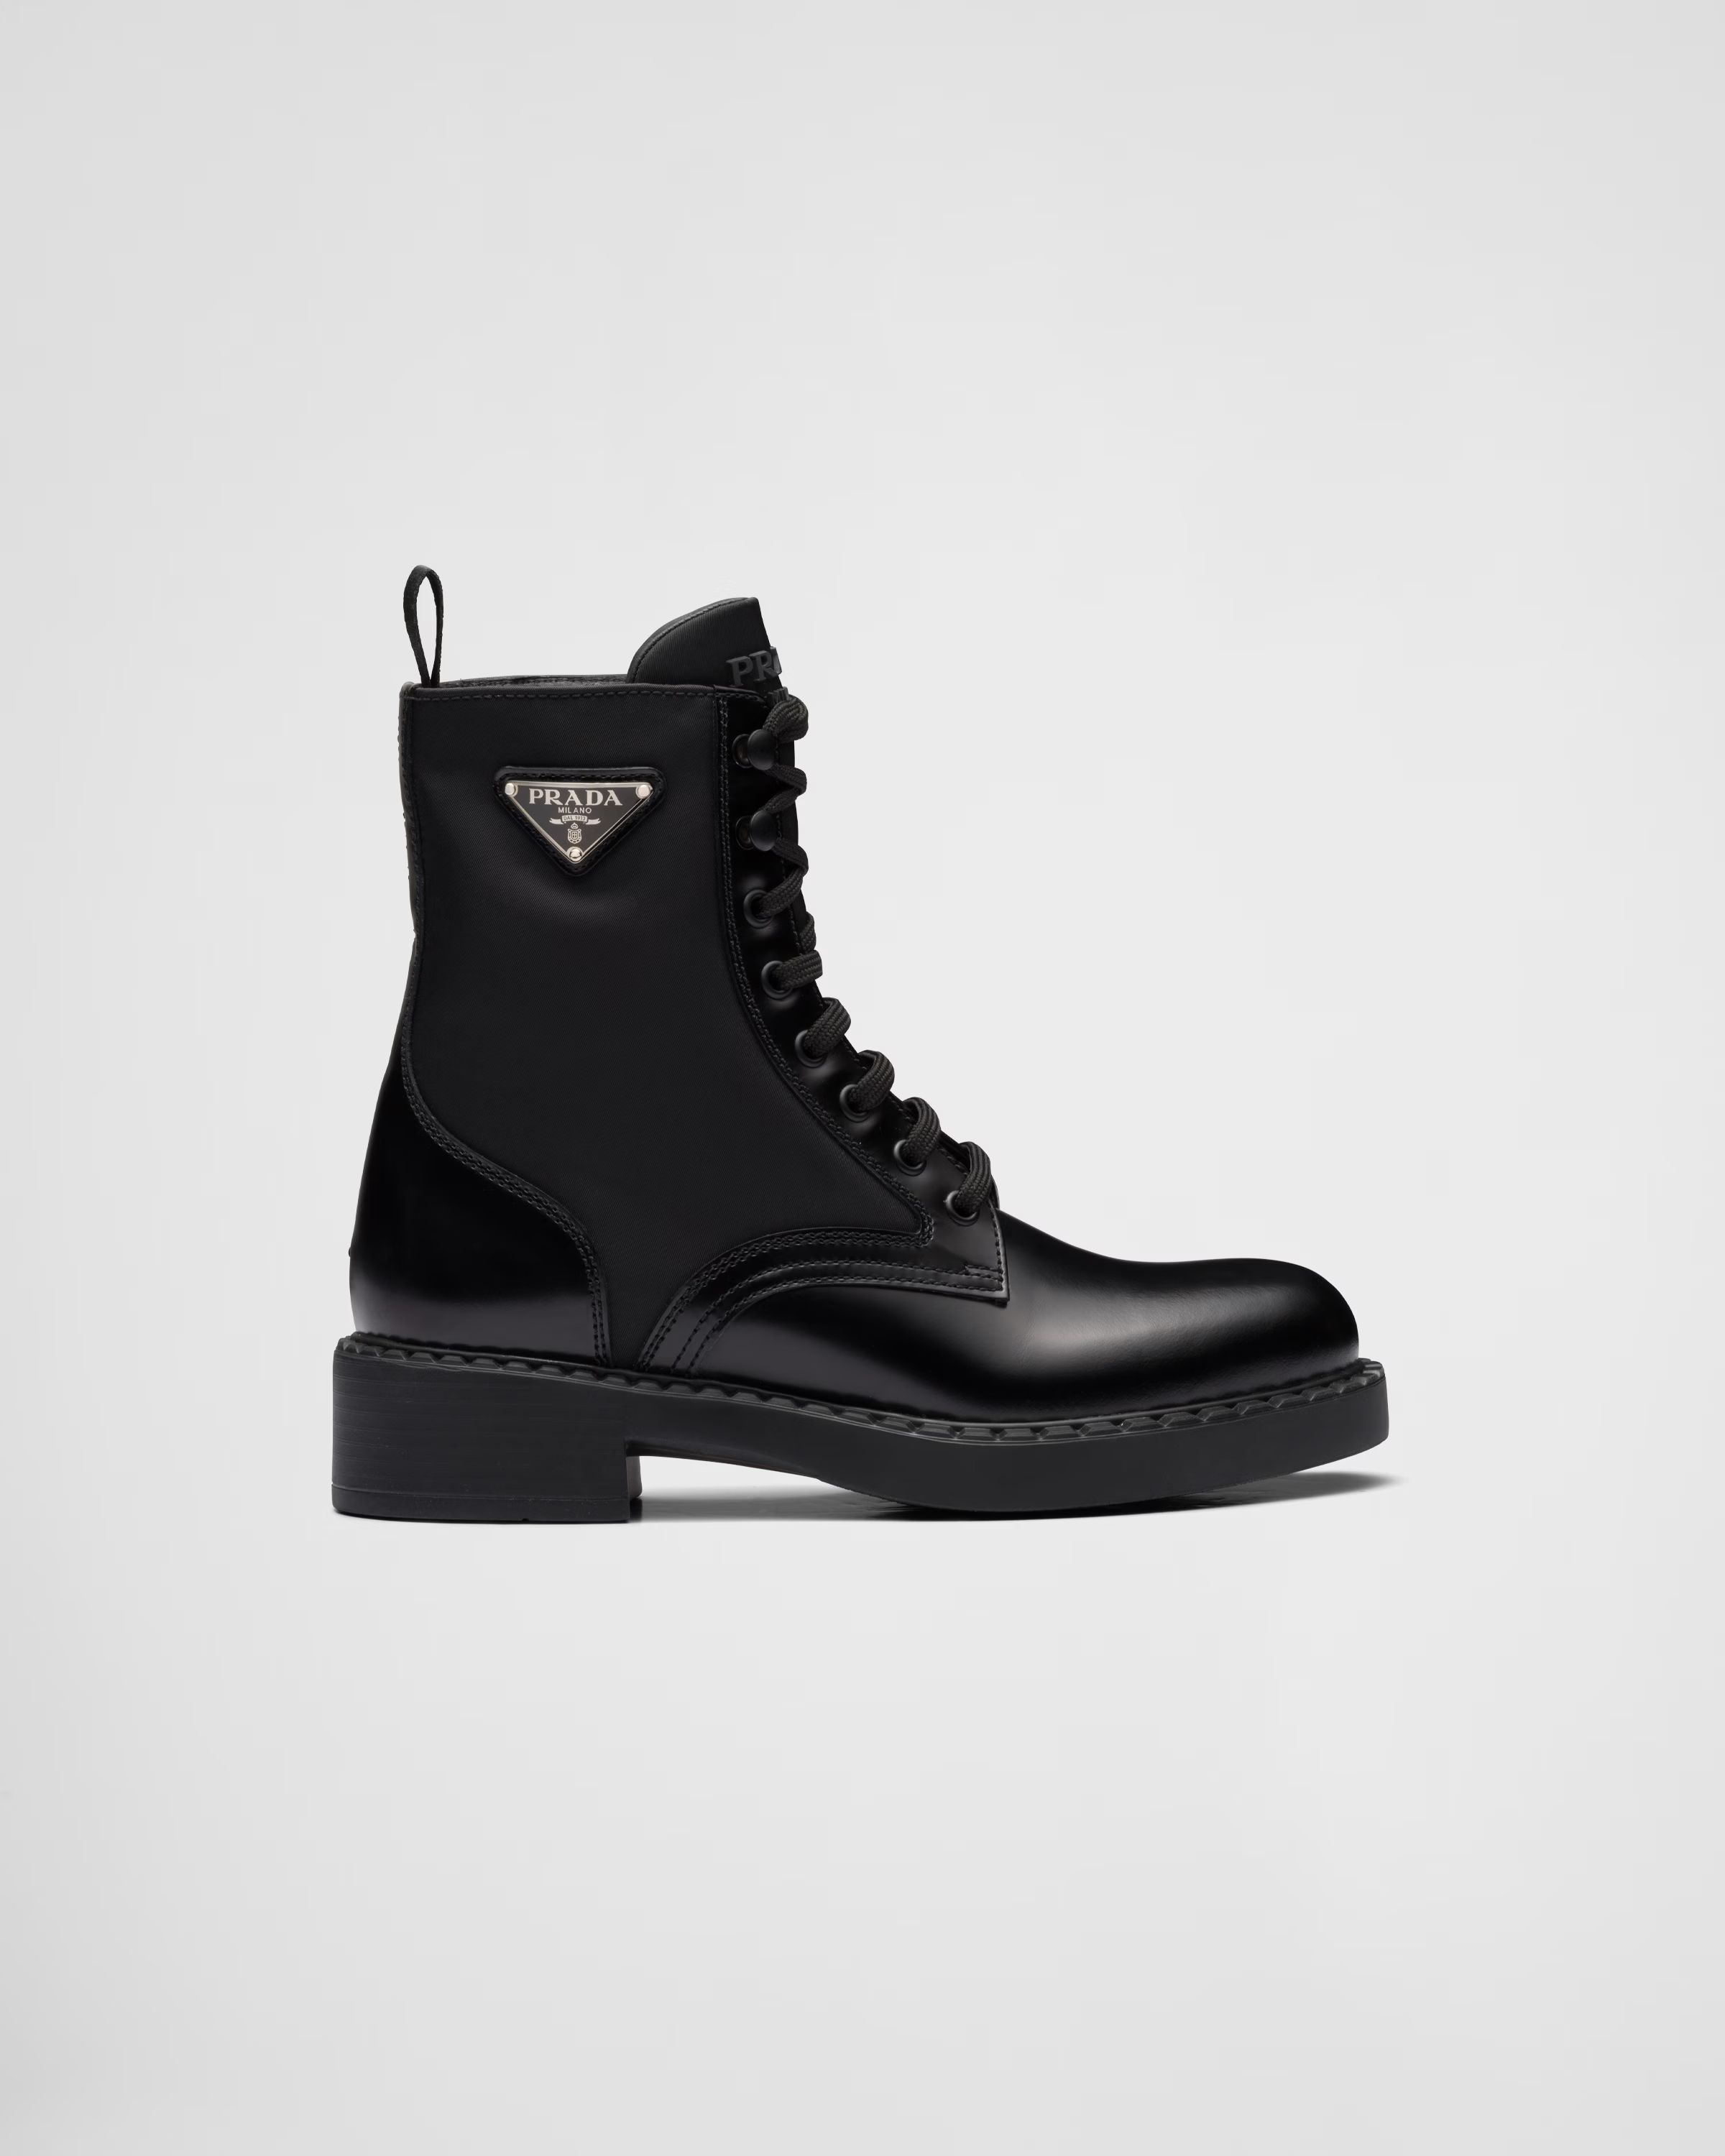 Brushed-leather and Re-Nylon boots | Prada Spa US